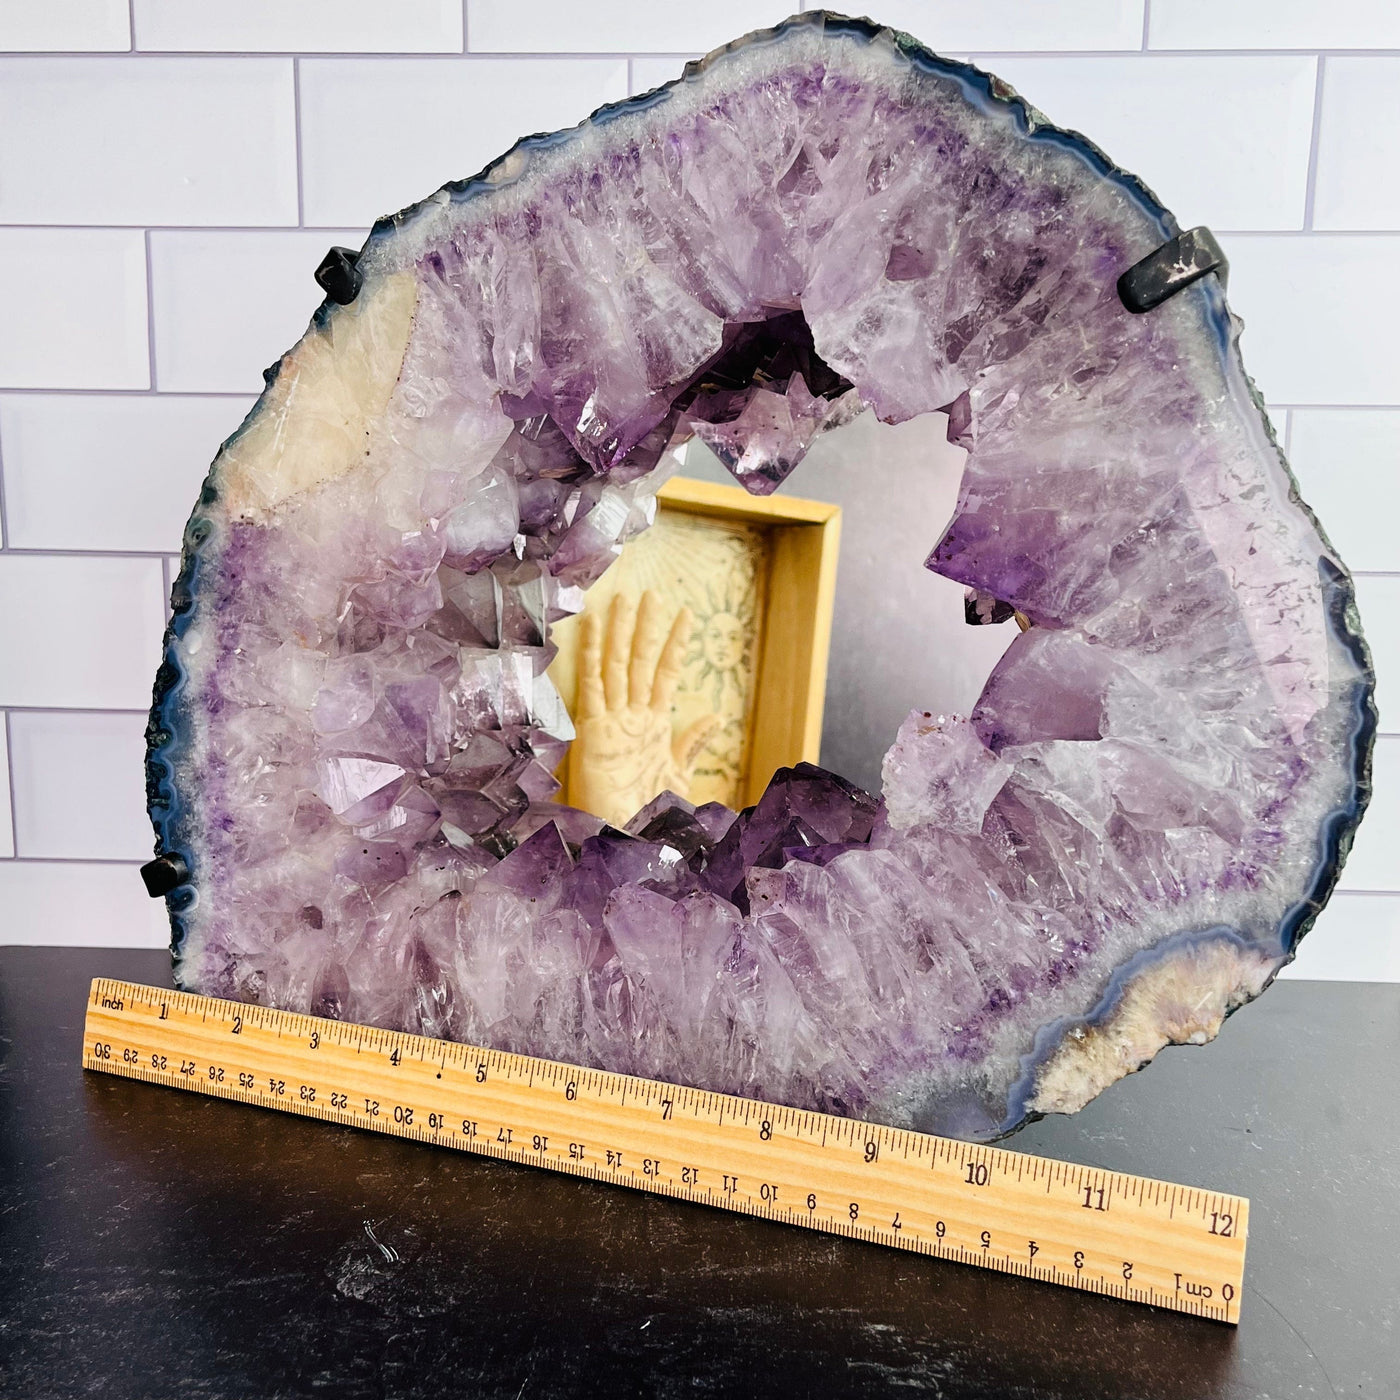 Frontal view of Amethyst Cluster with Calcite Mirror, pictured next to ruler